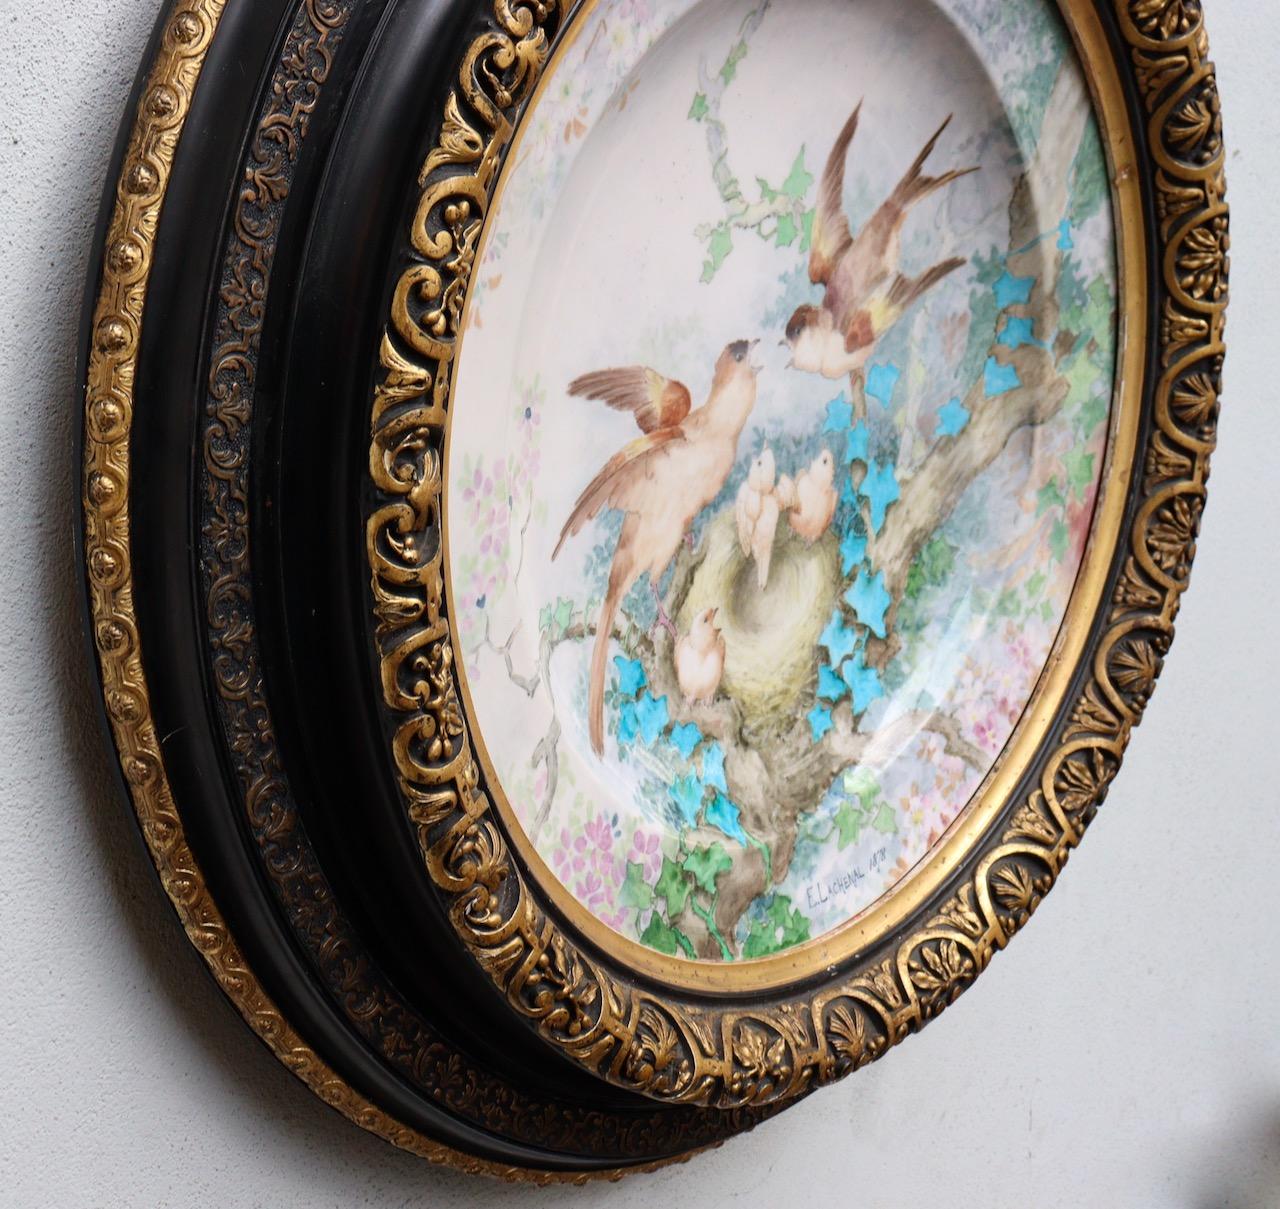 French Th�éodore Deck & Edmond Lachenal, an Impressive 19th Century Framed Charger